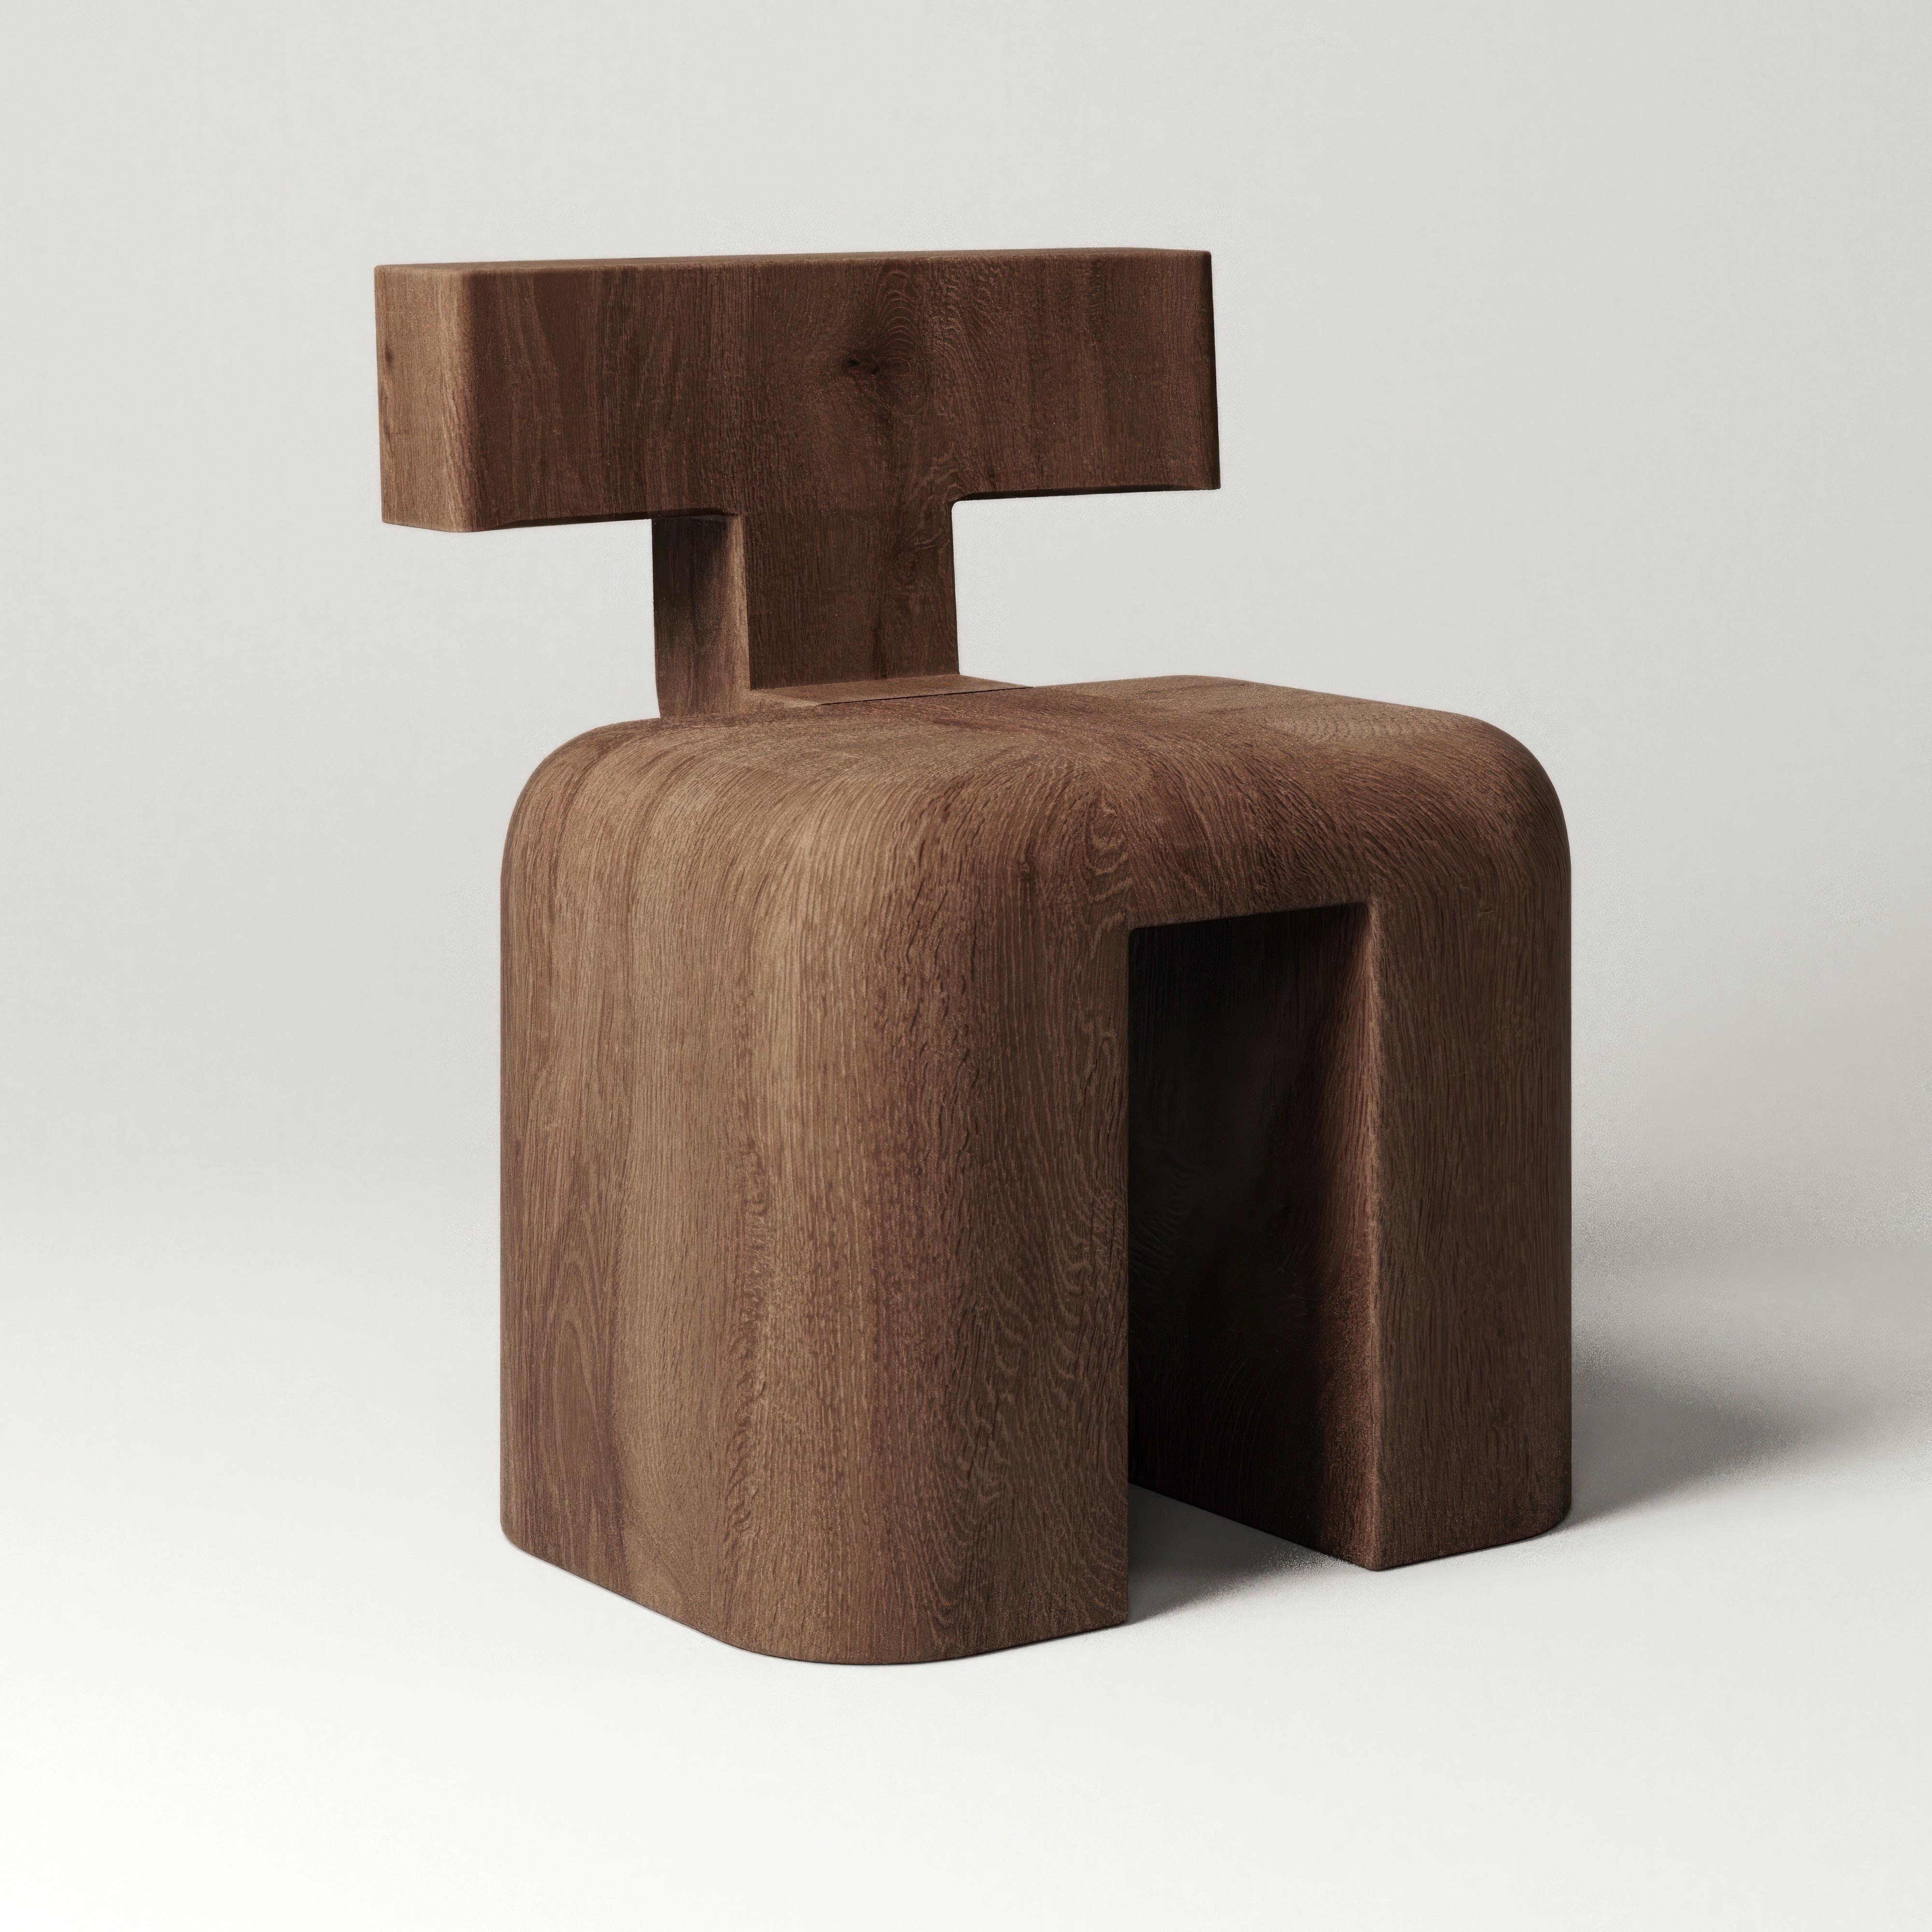 M_013 White Oak Dining Chair by Monolith Studio
Signed and Numbered.
Dimensions: D 40 x W 56 x H 71 cm. 
Materials: White oak.

Available in travertine, lava rock, onyx, walnut and white oak (on request). Please contact us. 

Monolith, founded in